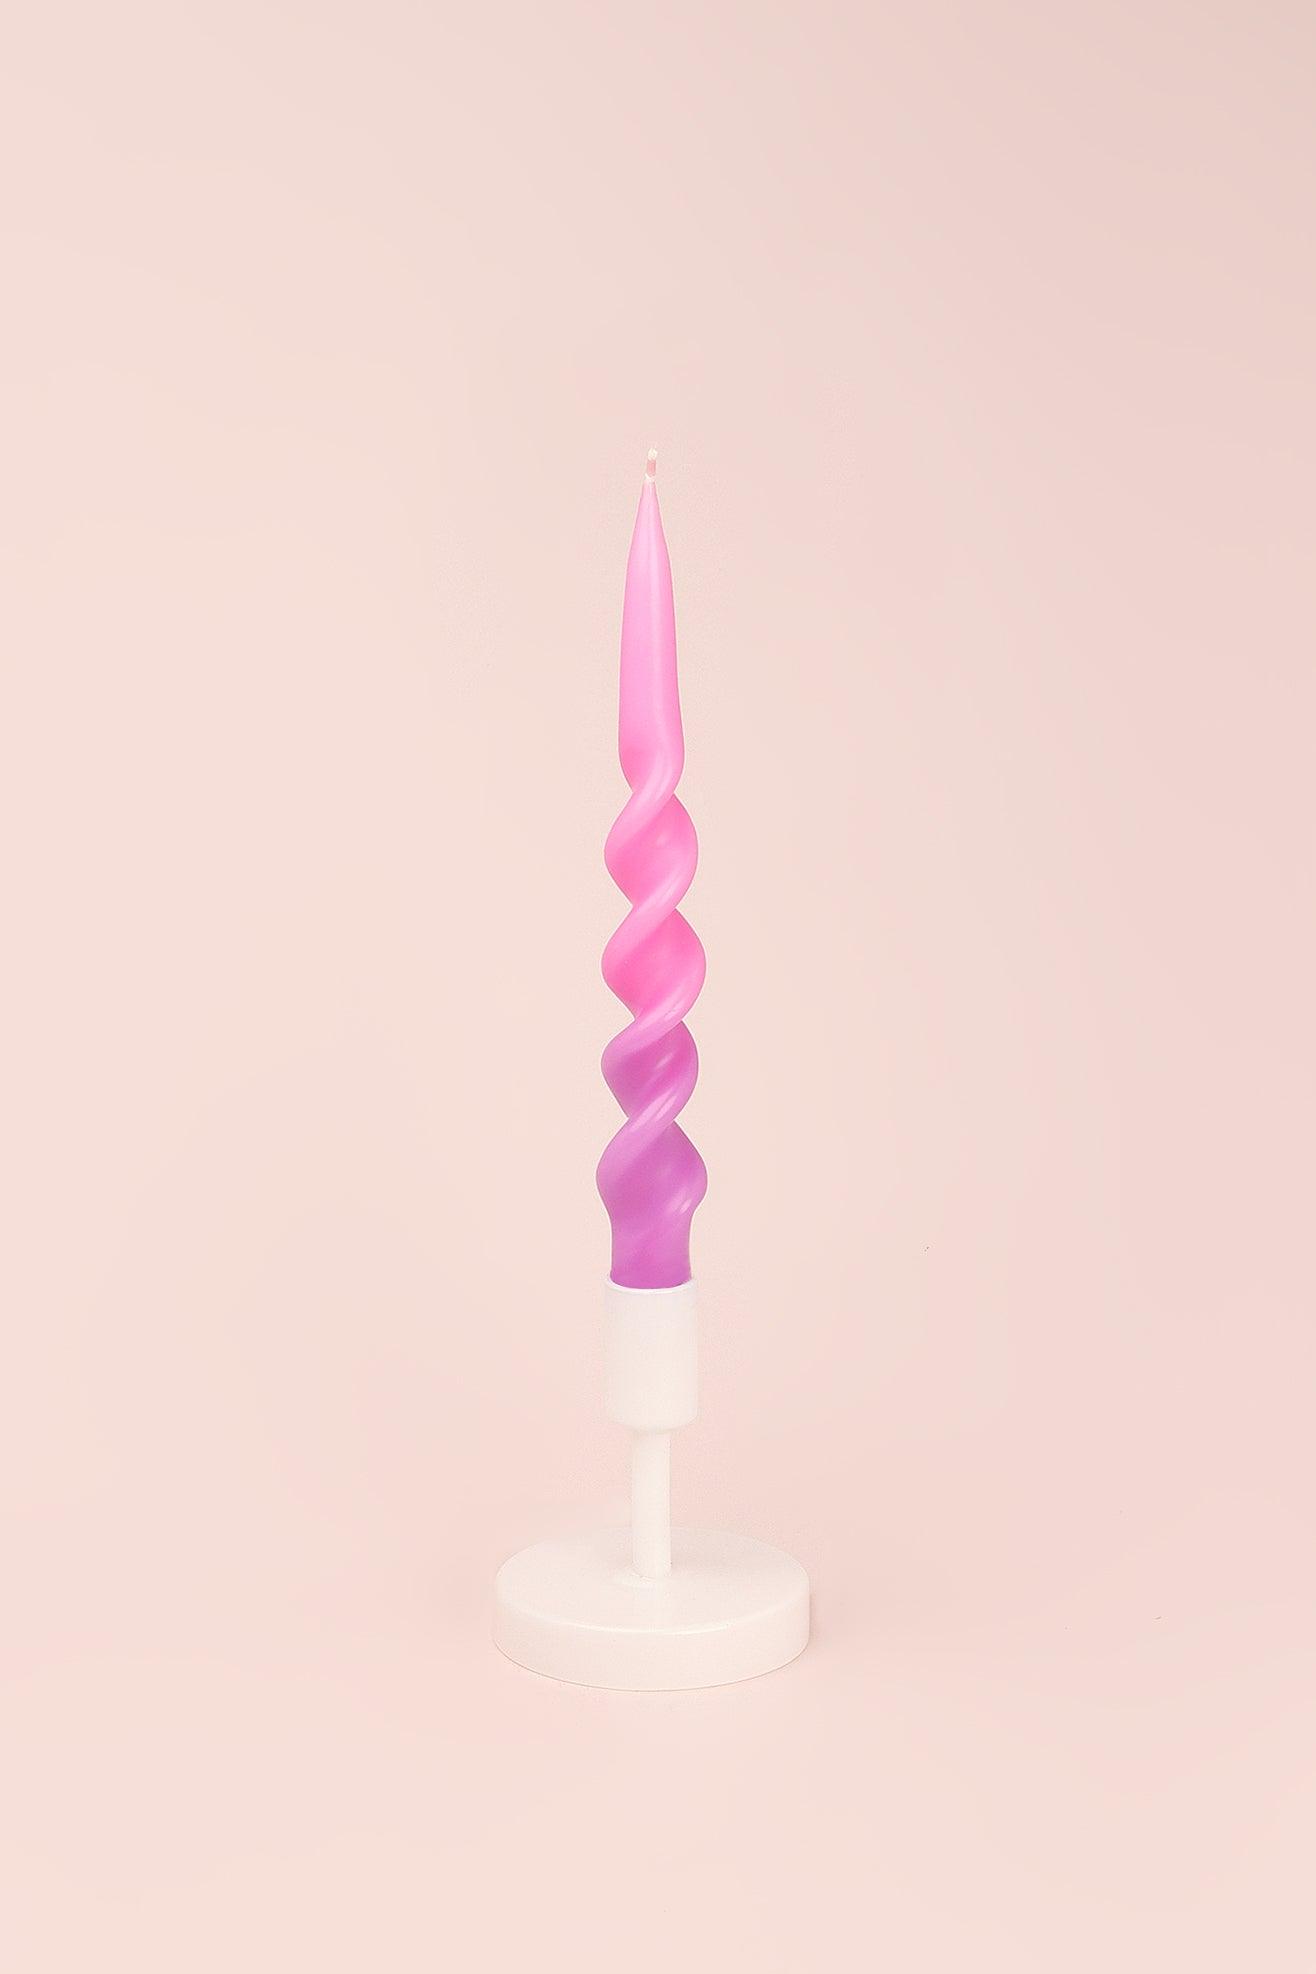 G Decor Candles Pink Set of Two-Toned Pink Spiral Twisted Hand Dipped Candlesticks Taper Church Dinner Candles